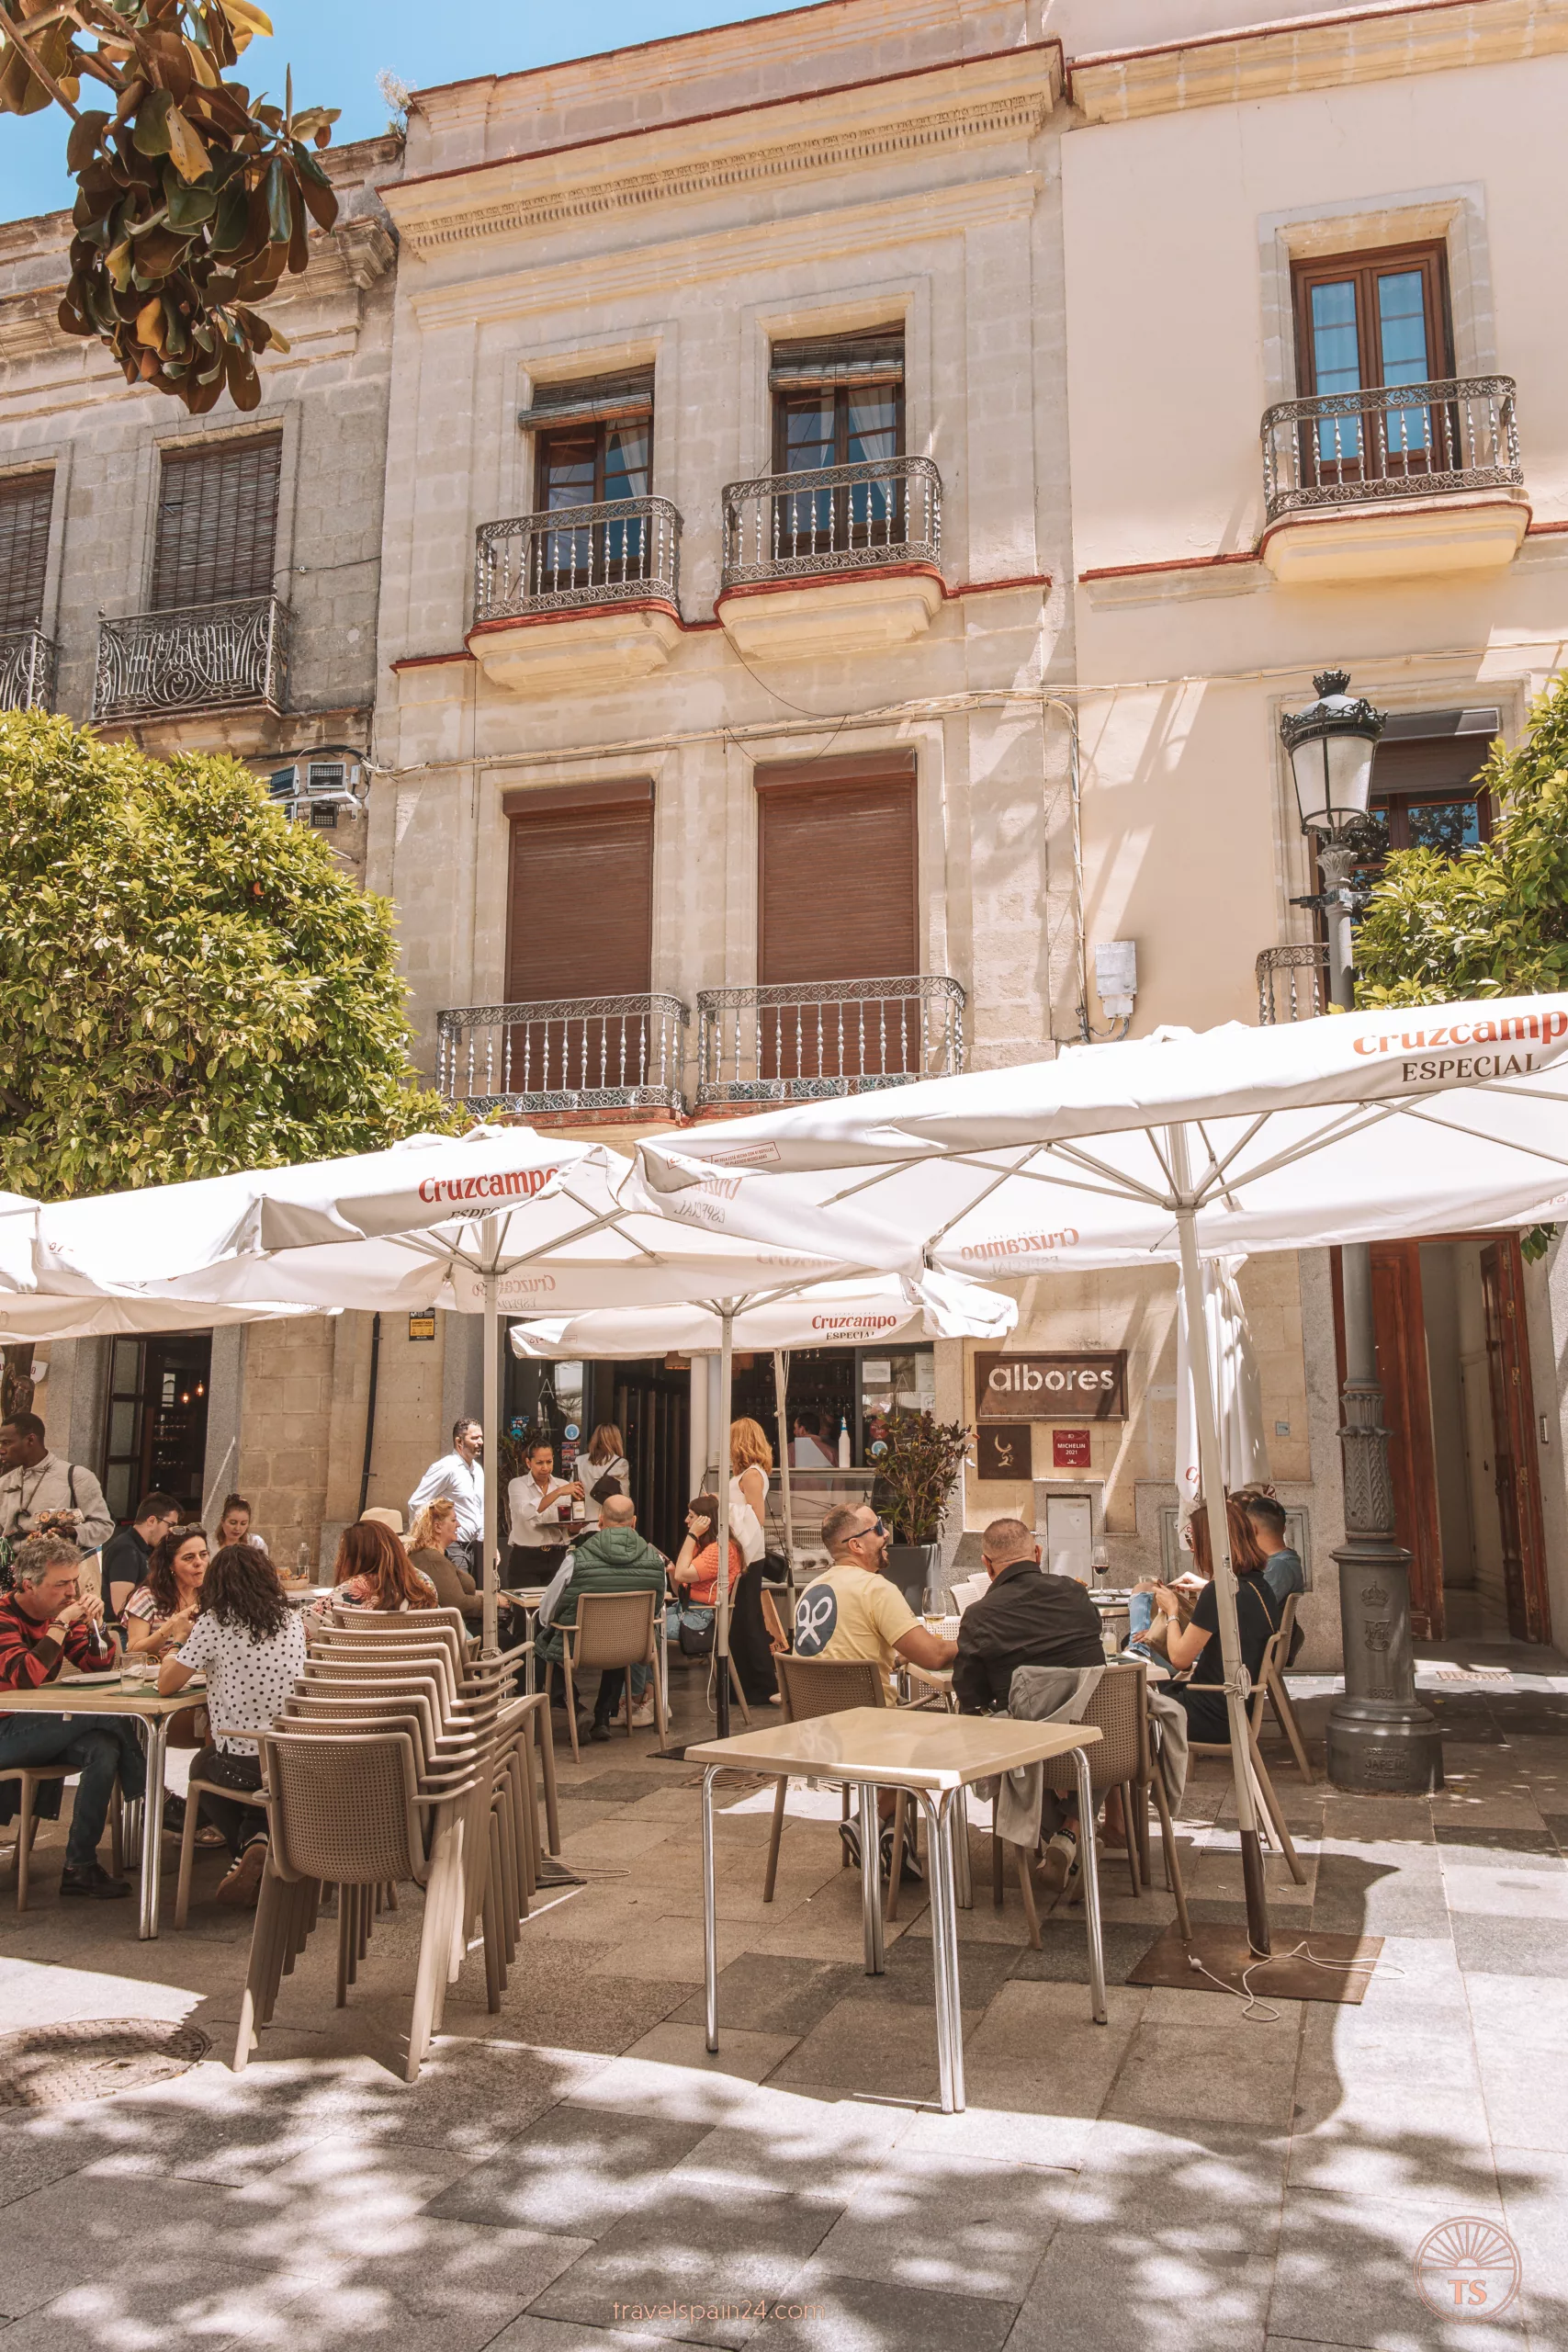 Entrance to Bar & Restaurante Albores in Jerez de la Frontera, with diners enjoying tapas and drinks outside. This image relates to the post by showcasing a favorite dining spot in Jerez de la Frontera.